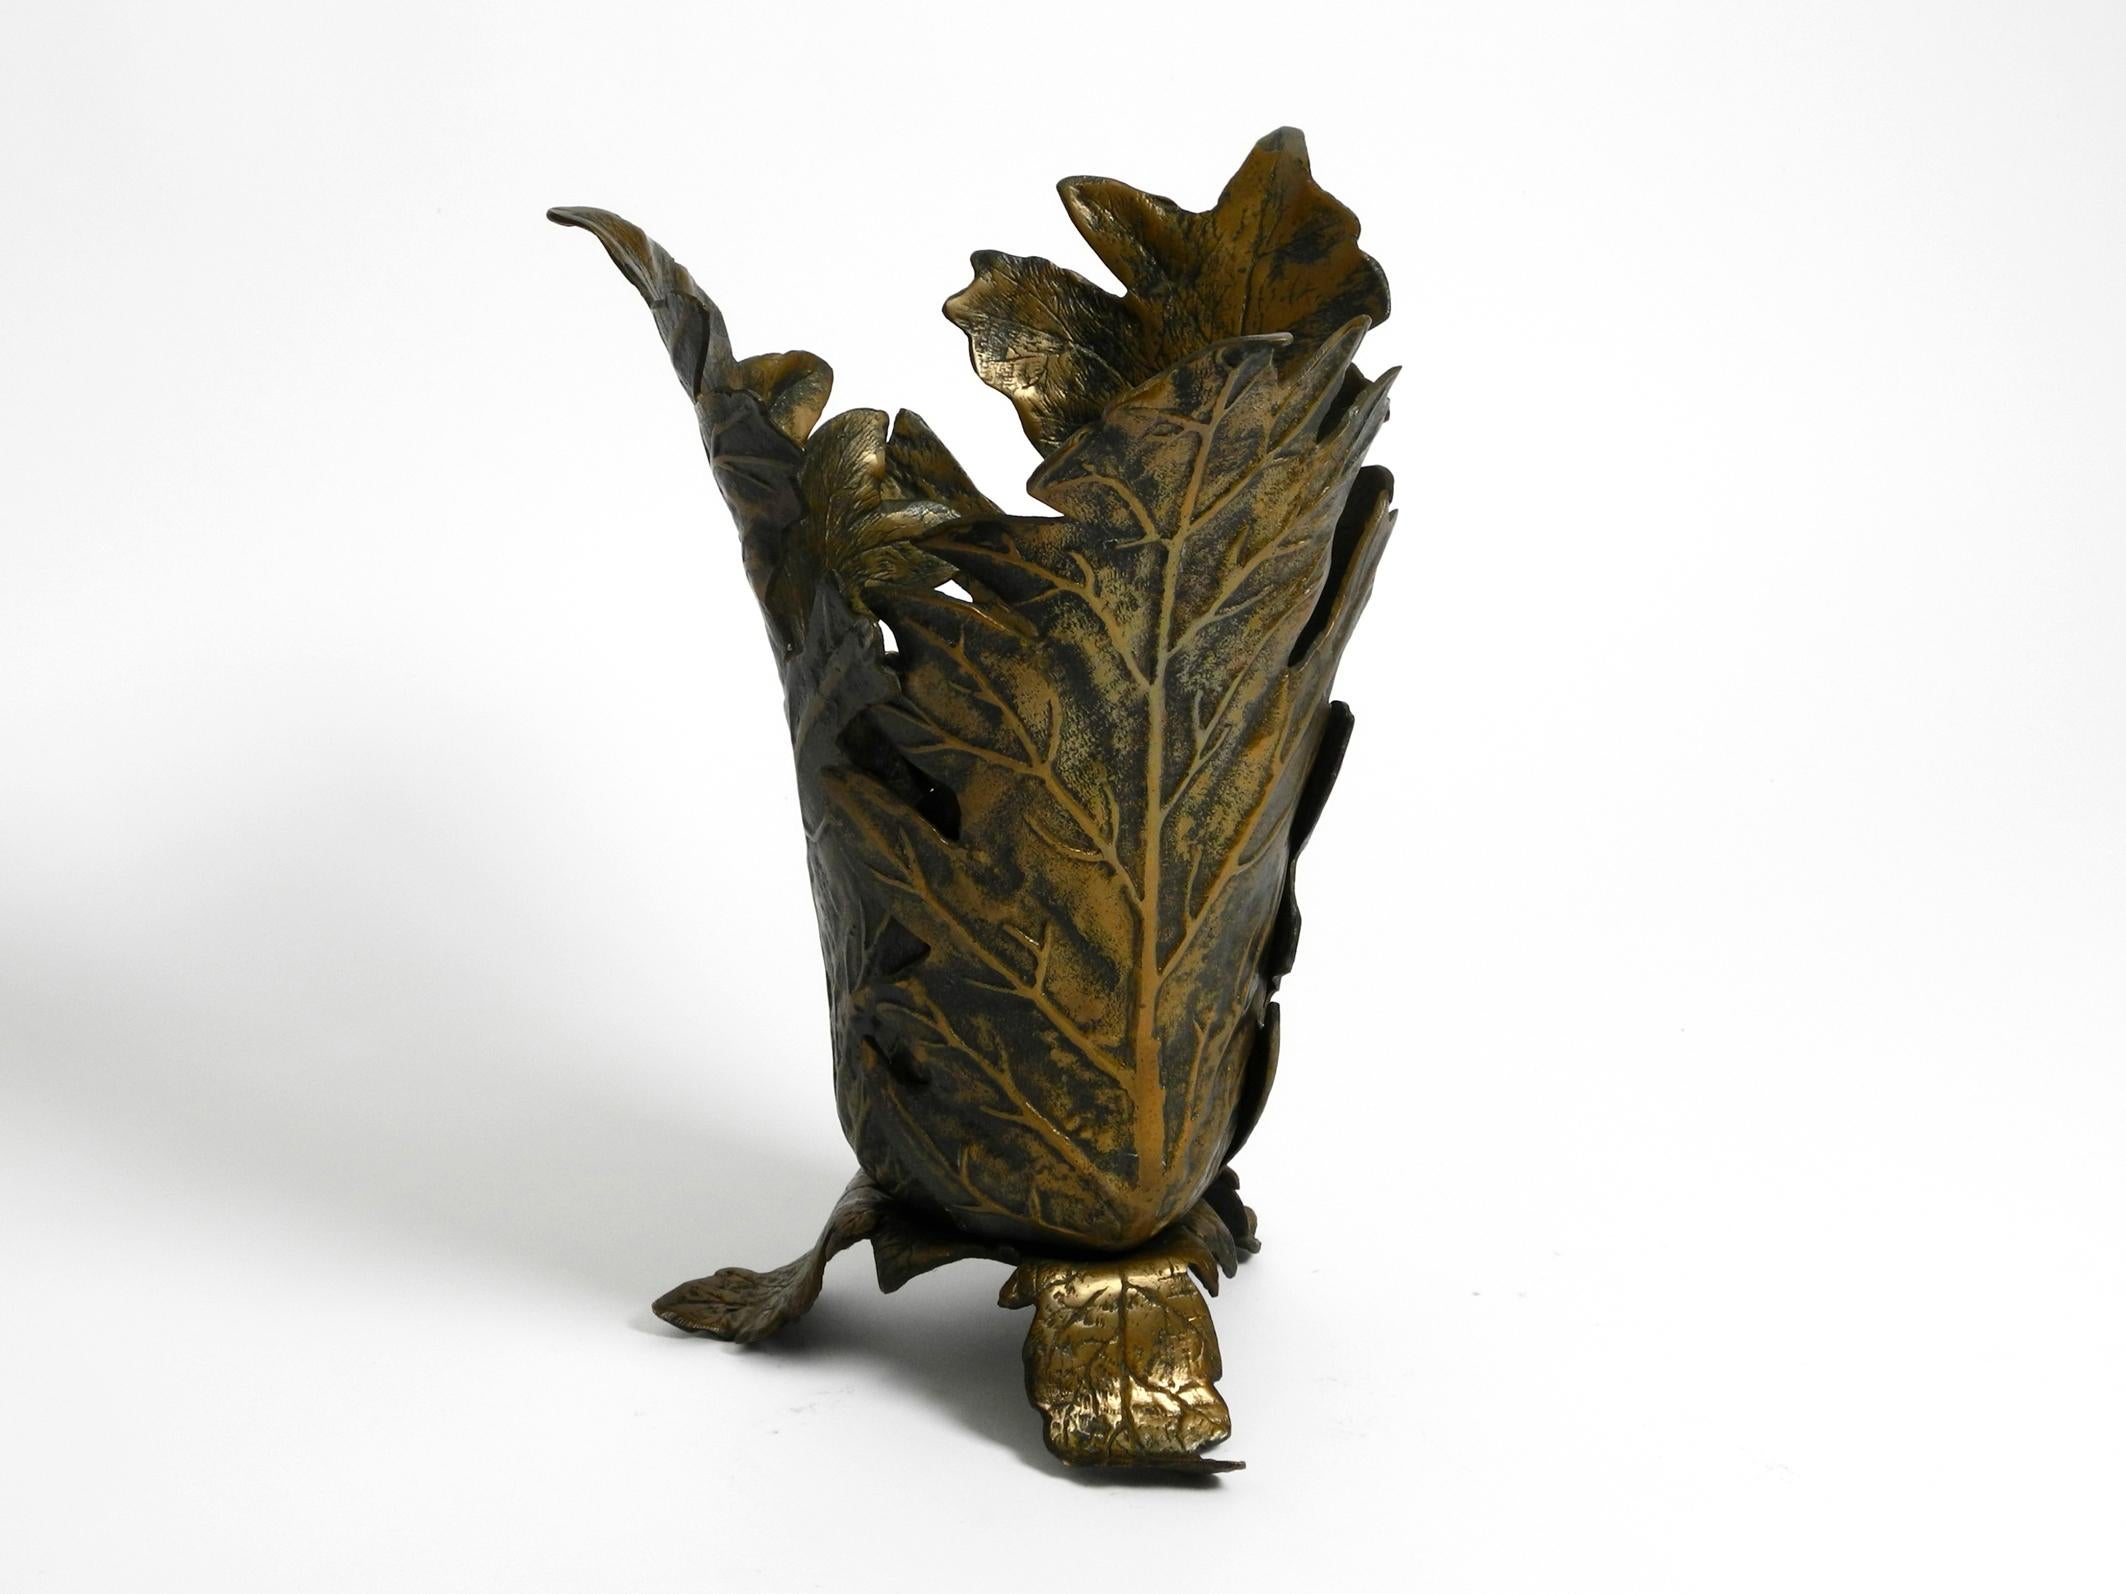 Exceptional 1960s sculptural brass umbrella stand.
Designed by the well-known Italian artist and designer Gabriella Crespi.
Great floral very elaborate design. Made in Italy.
The umbrella stand is made entirely of heavy solid brass.
Very good